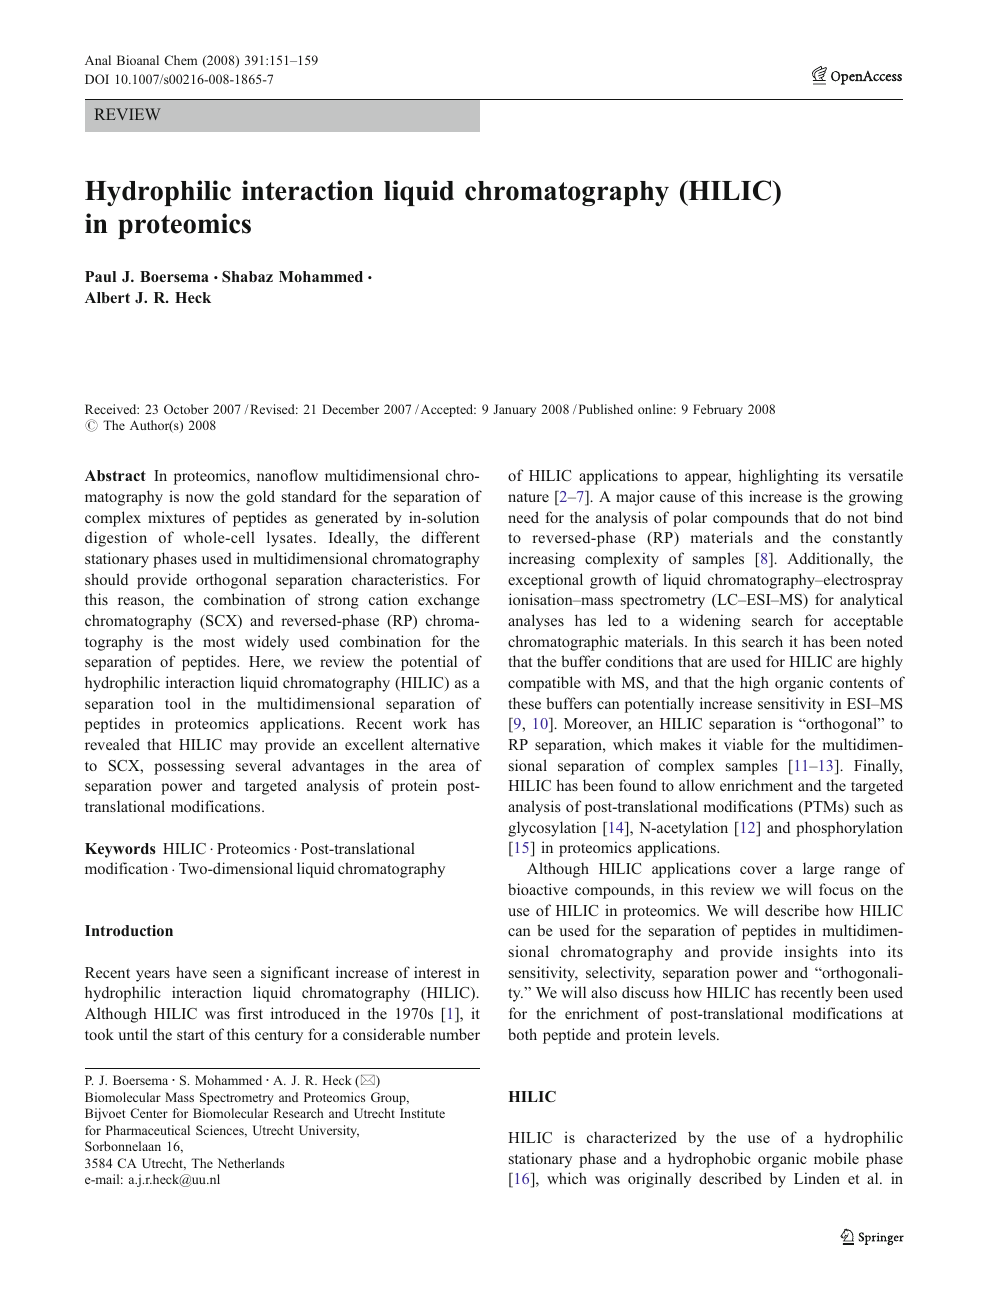 Hydrophilic Interaction Liquid Chromatography Hilic In Proteomics Topic Of Research Paper In Chemical Sciences Download Scholarly Article Pdf And Read For Free On Cyberleninka Open Science Hub